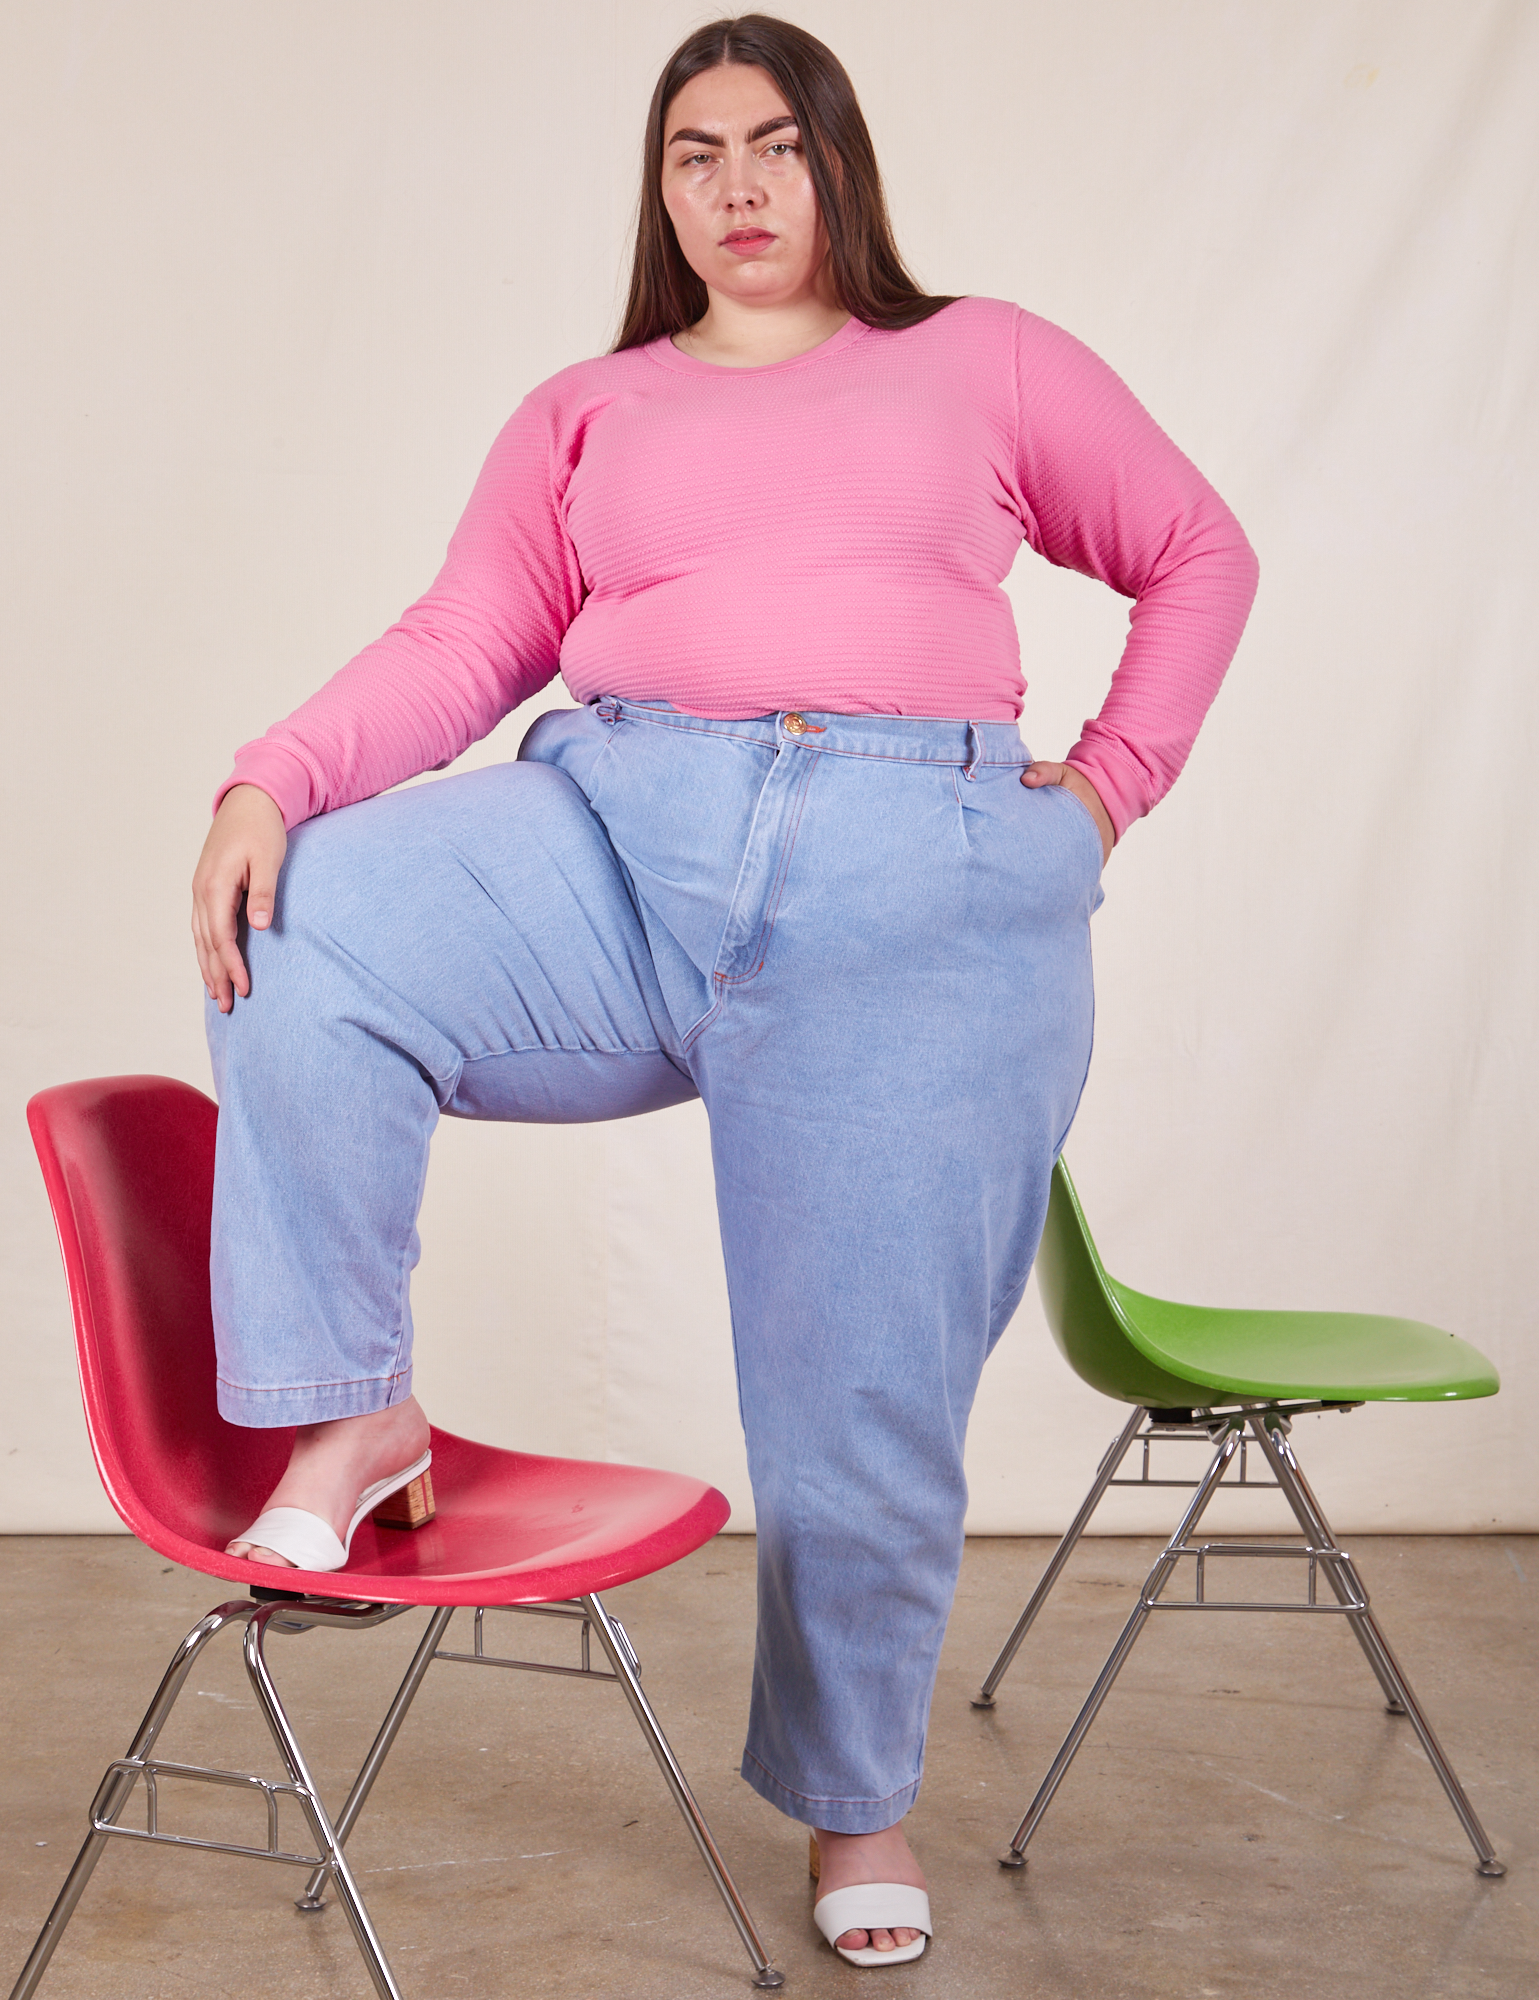 Marielena is wearing Honeycomb Thermal in Bubblegum Pink and light wash Denim Trousers